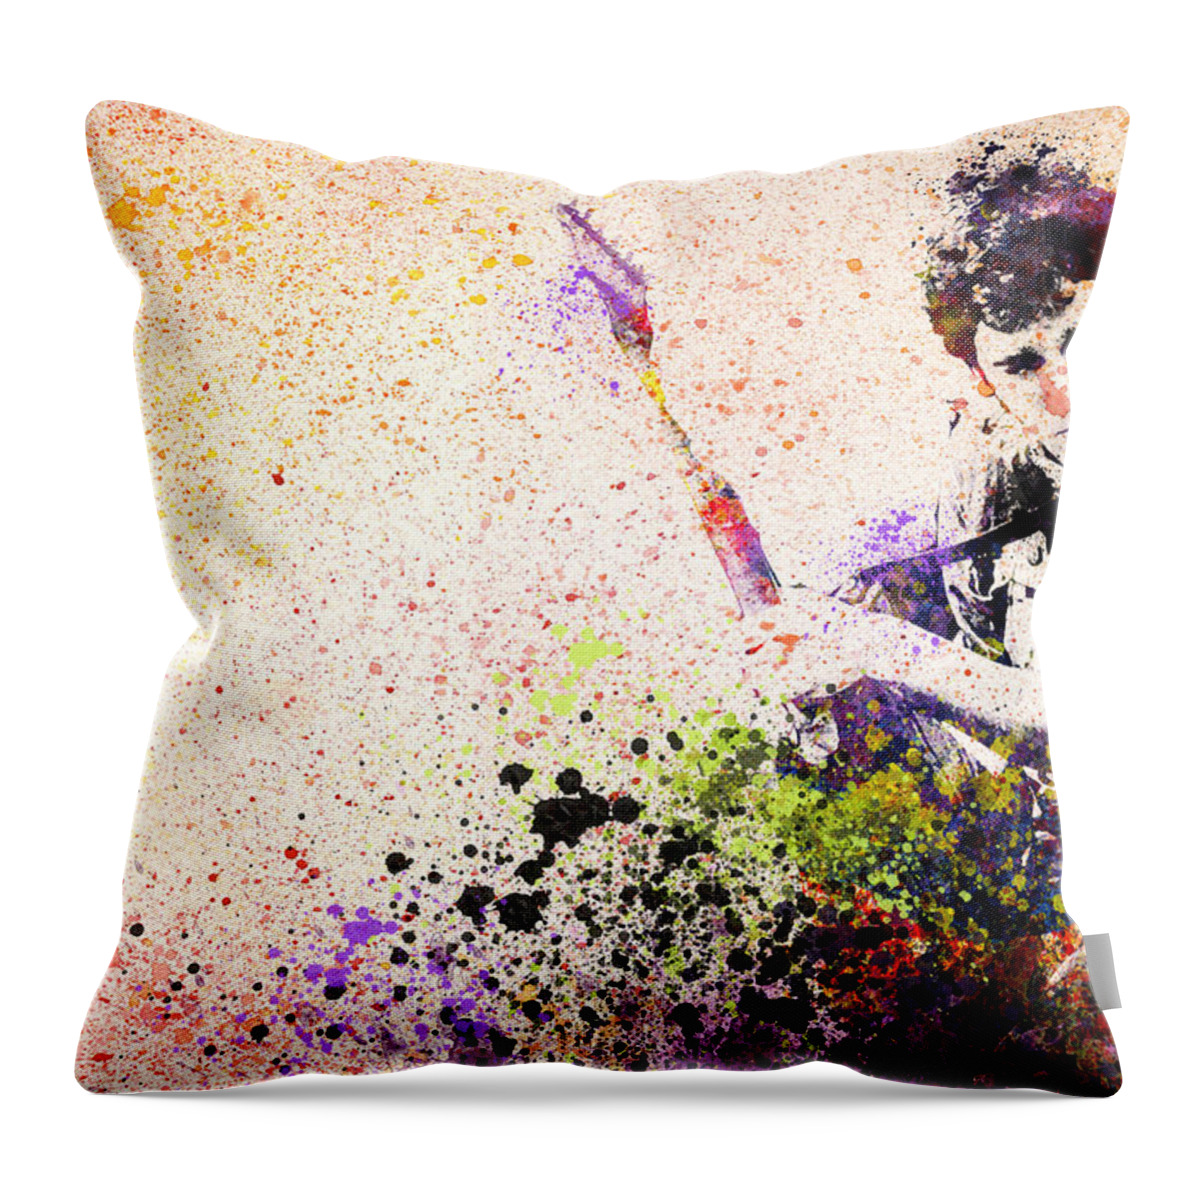 Bruce Springsteen Throw Pillow featuring the painting Bruce Springsteen Splats 2 by Bekim M